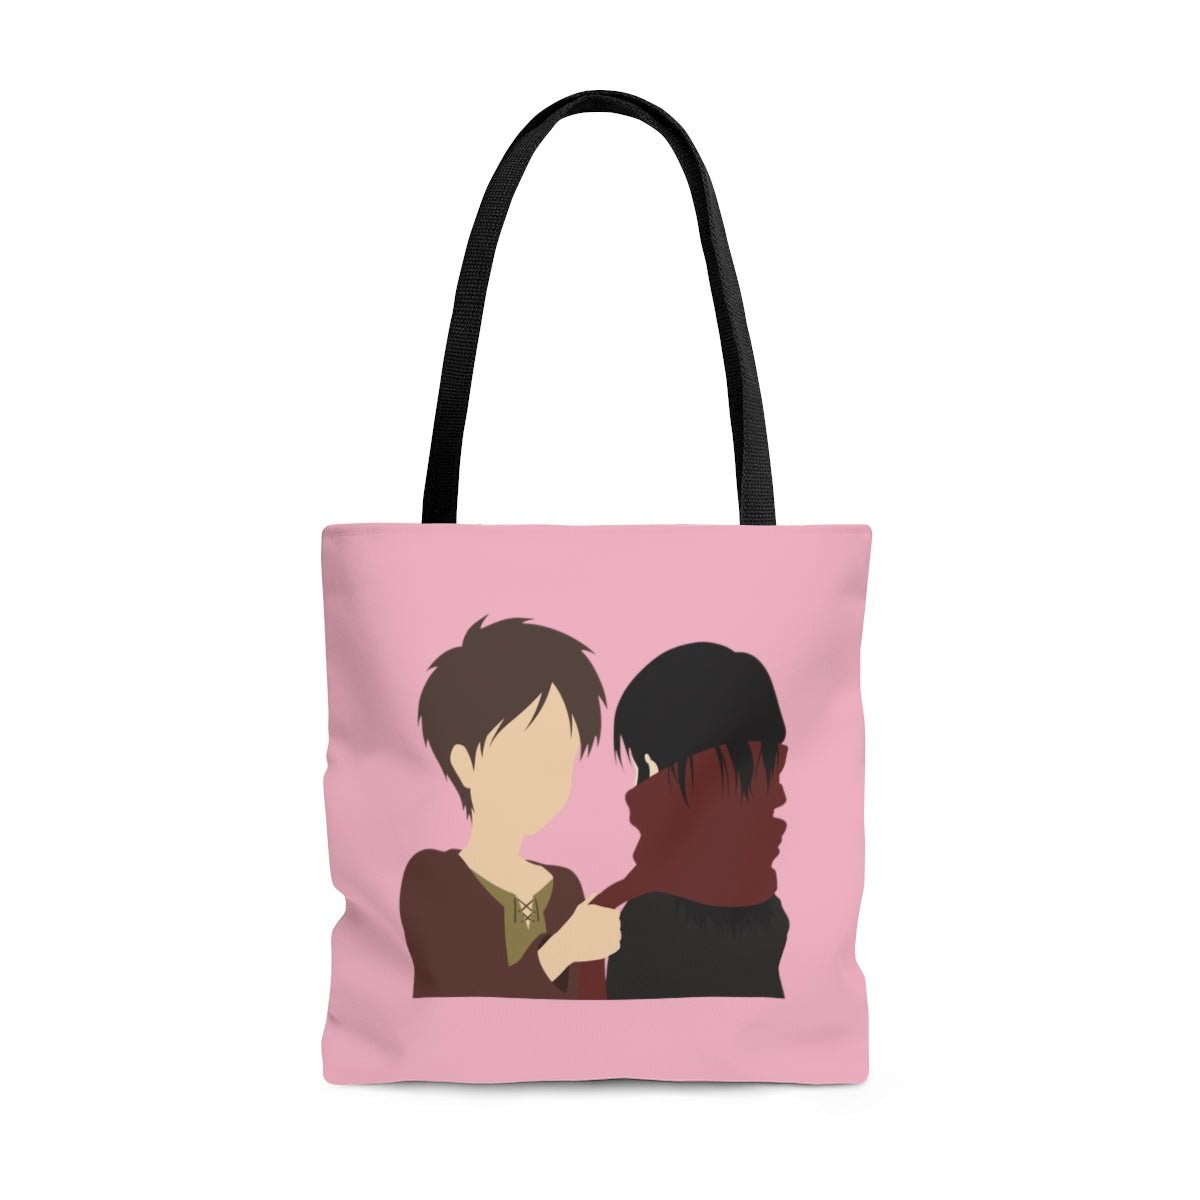 Eren Mikasa Love Tote Bag Attack on Titan Anime Tote Bag - One Punch Fits